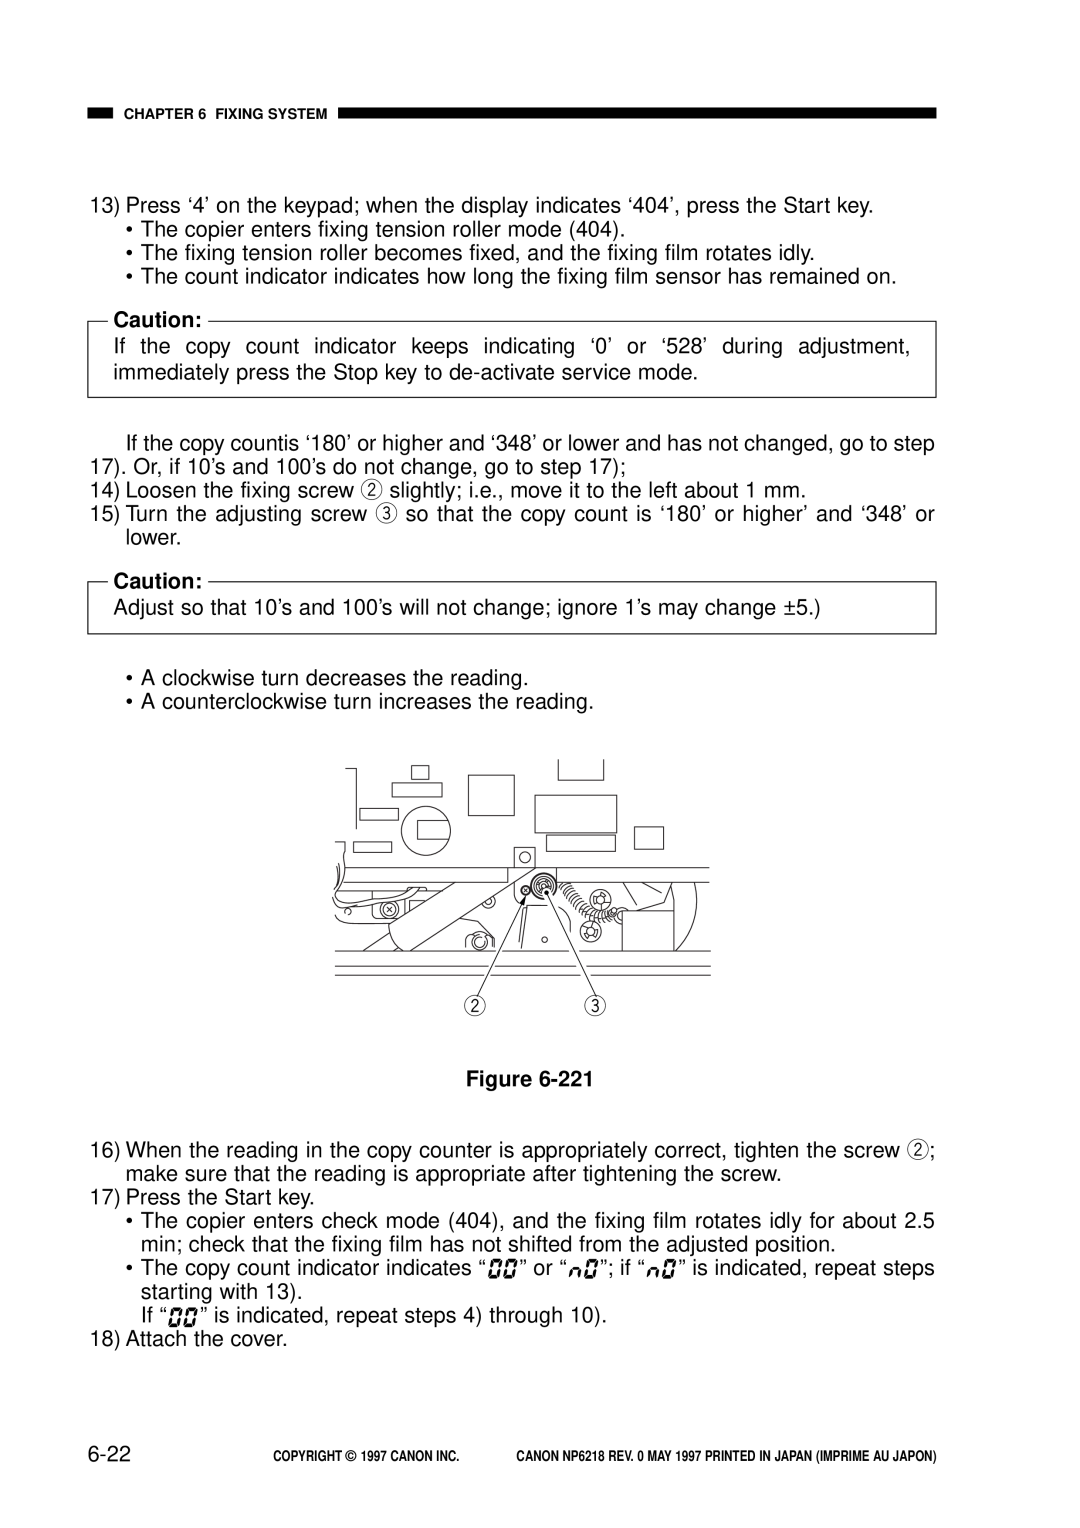 Canon NP6218, FY8-13EX-000 service manual 6-22, The copier enters fixing tension roller mode 